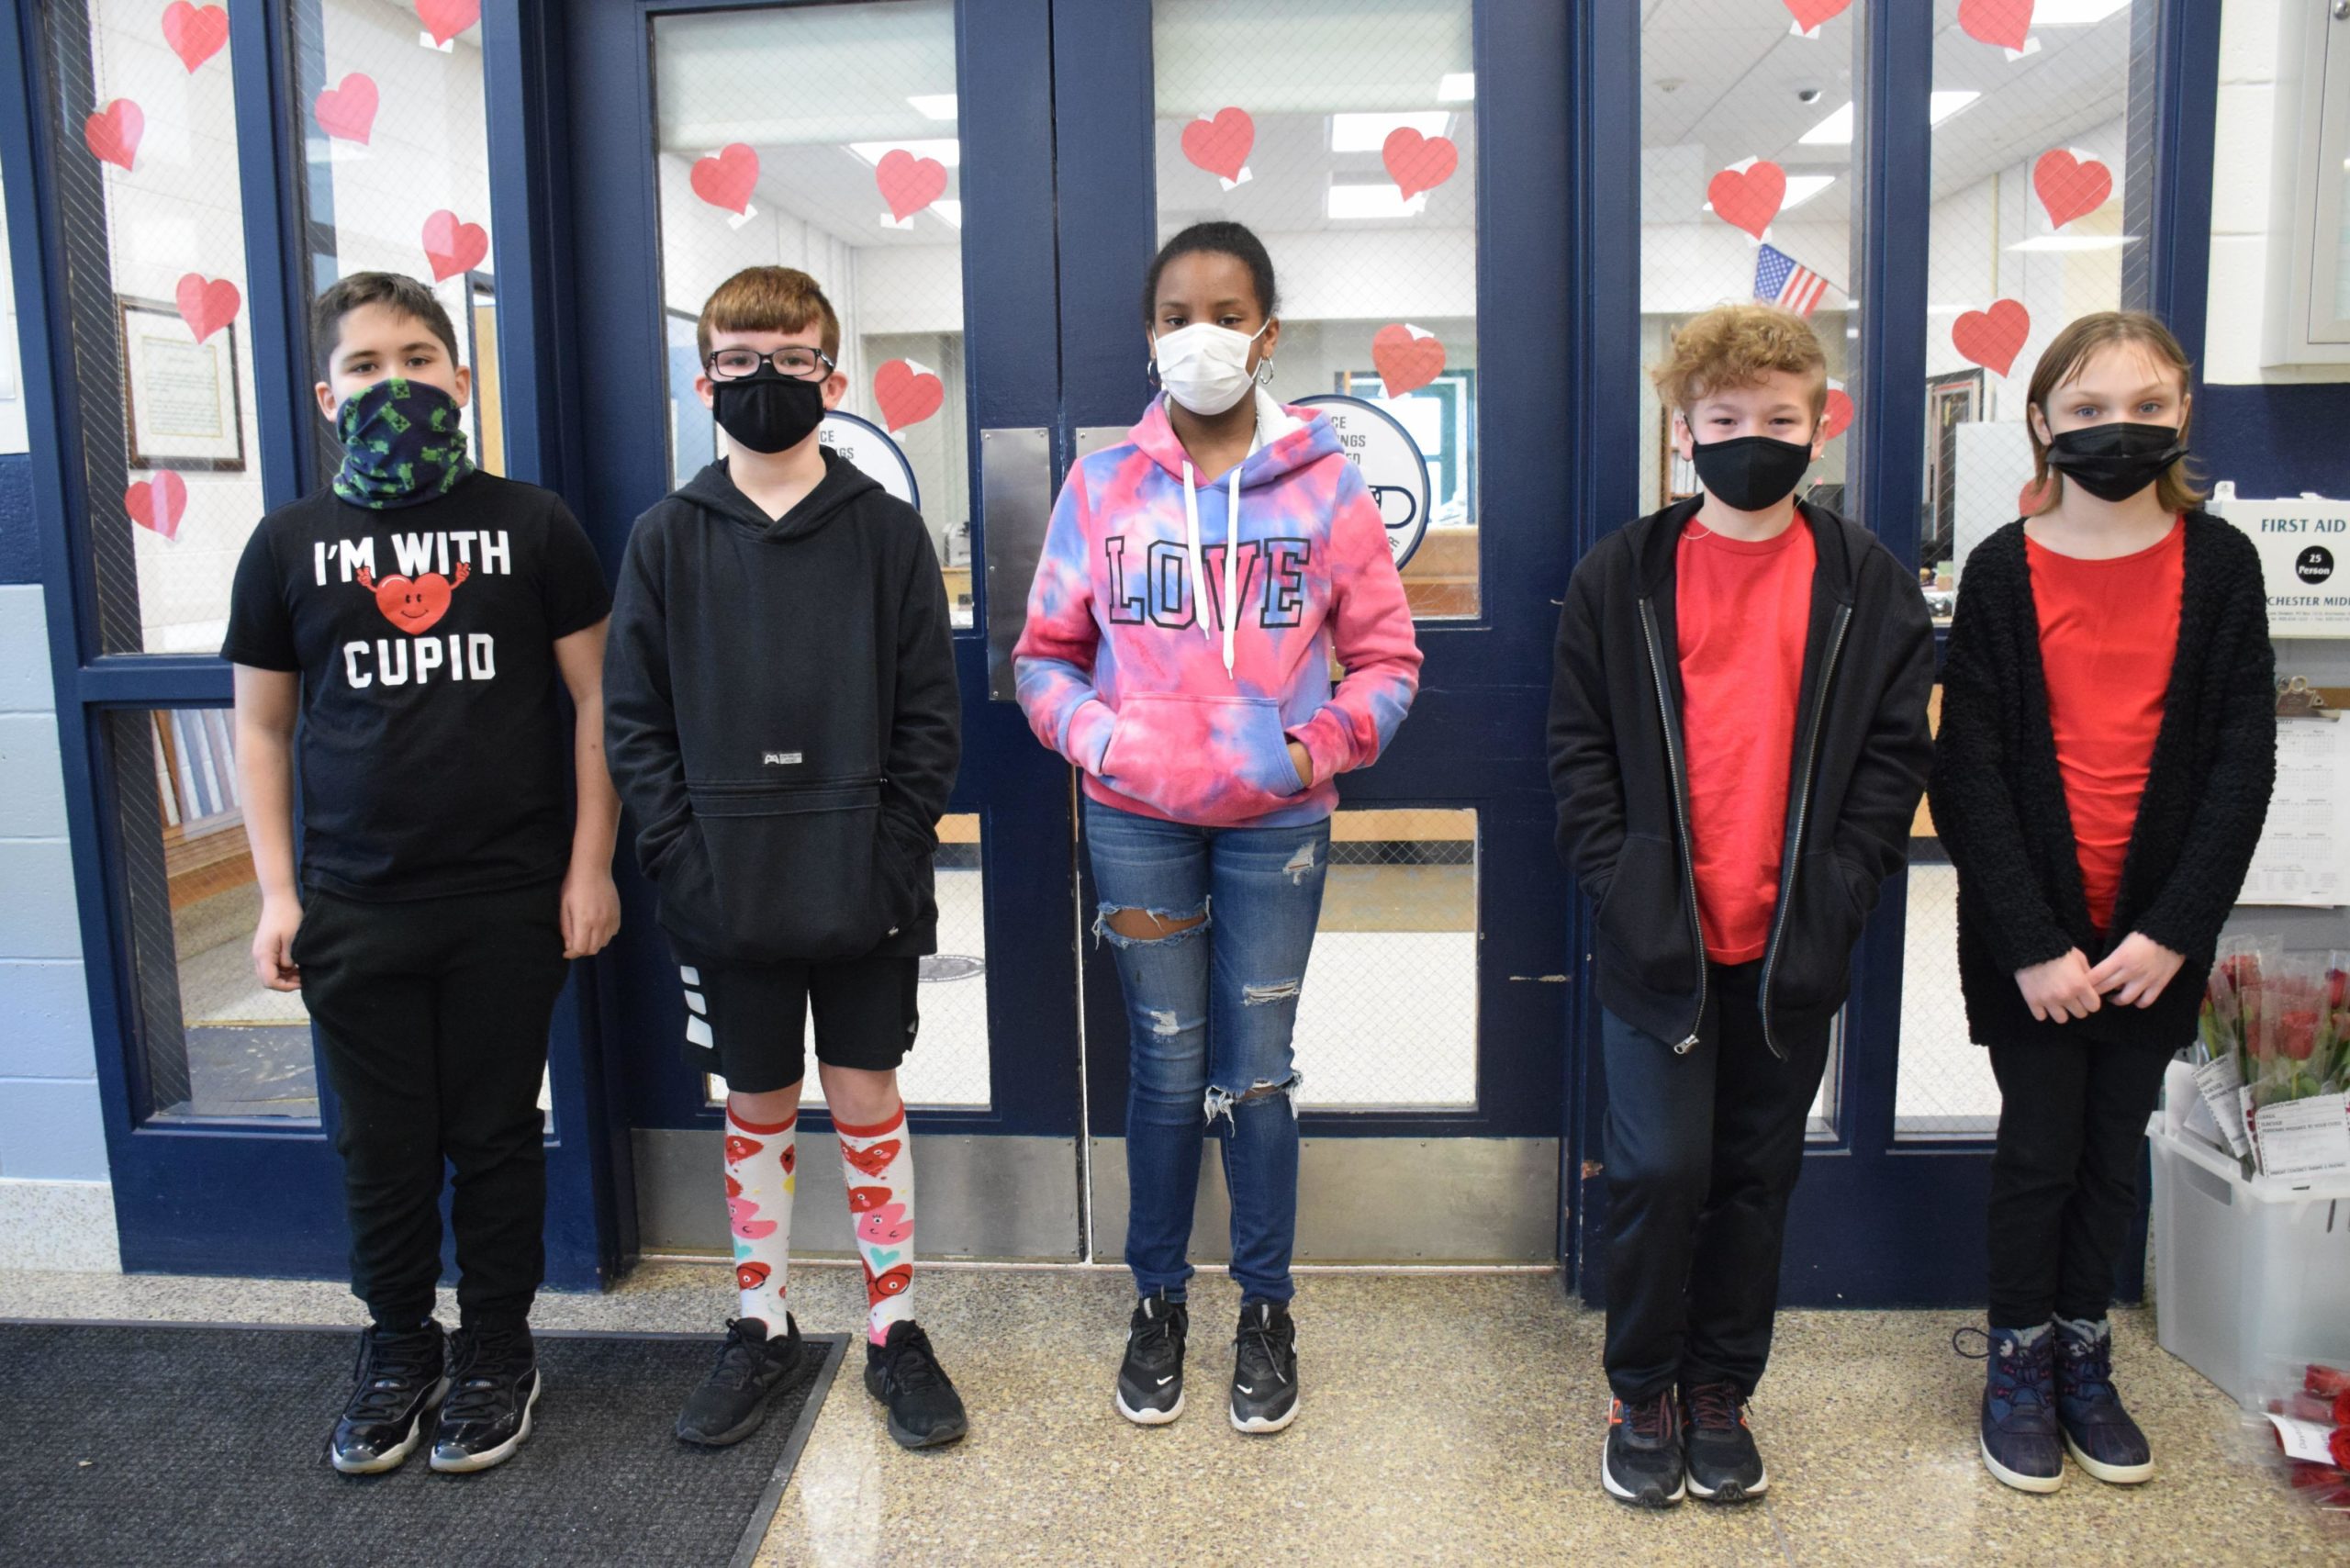 Kindness was the common theme at Dayton Avenue Elementary School for the month of February as students across grade levels participated in the annual Kindness Month.